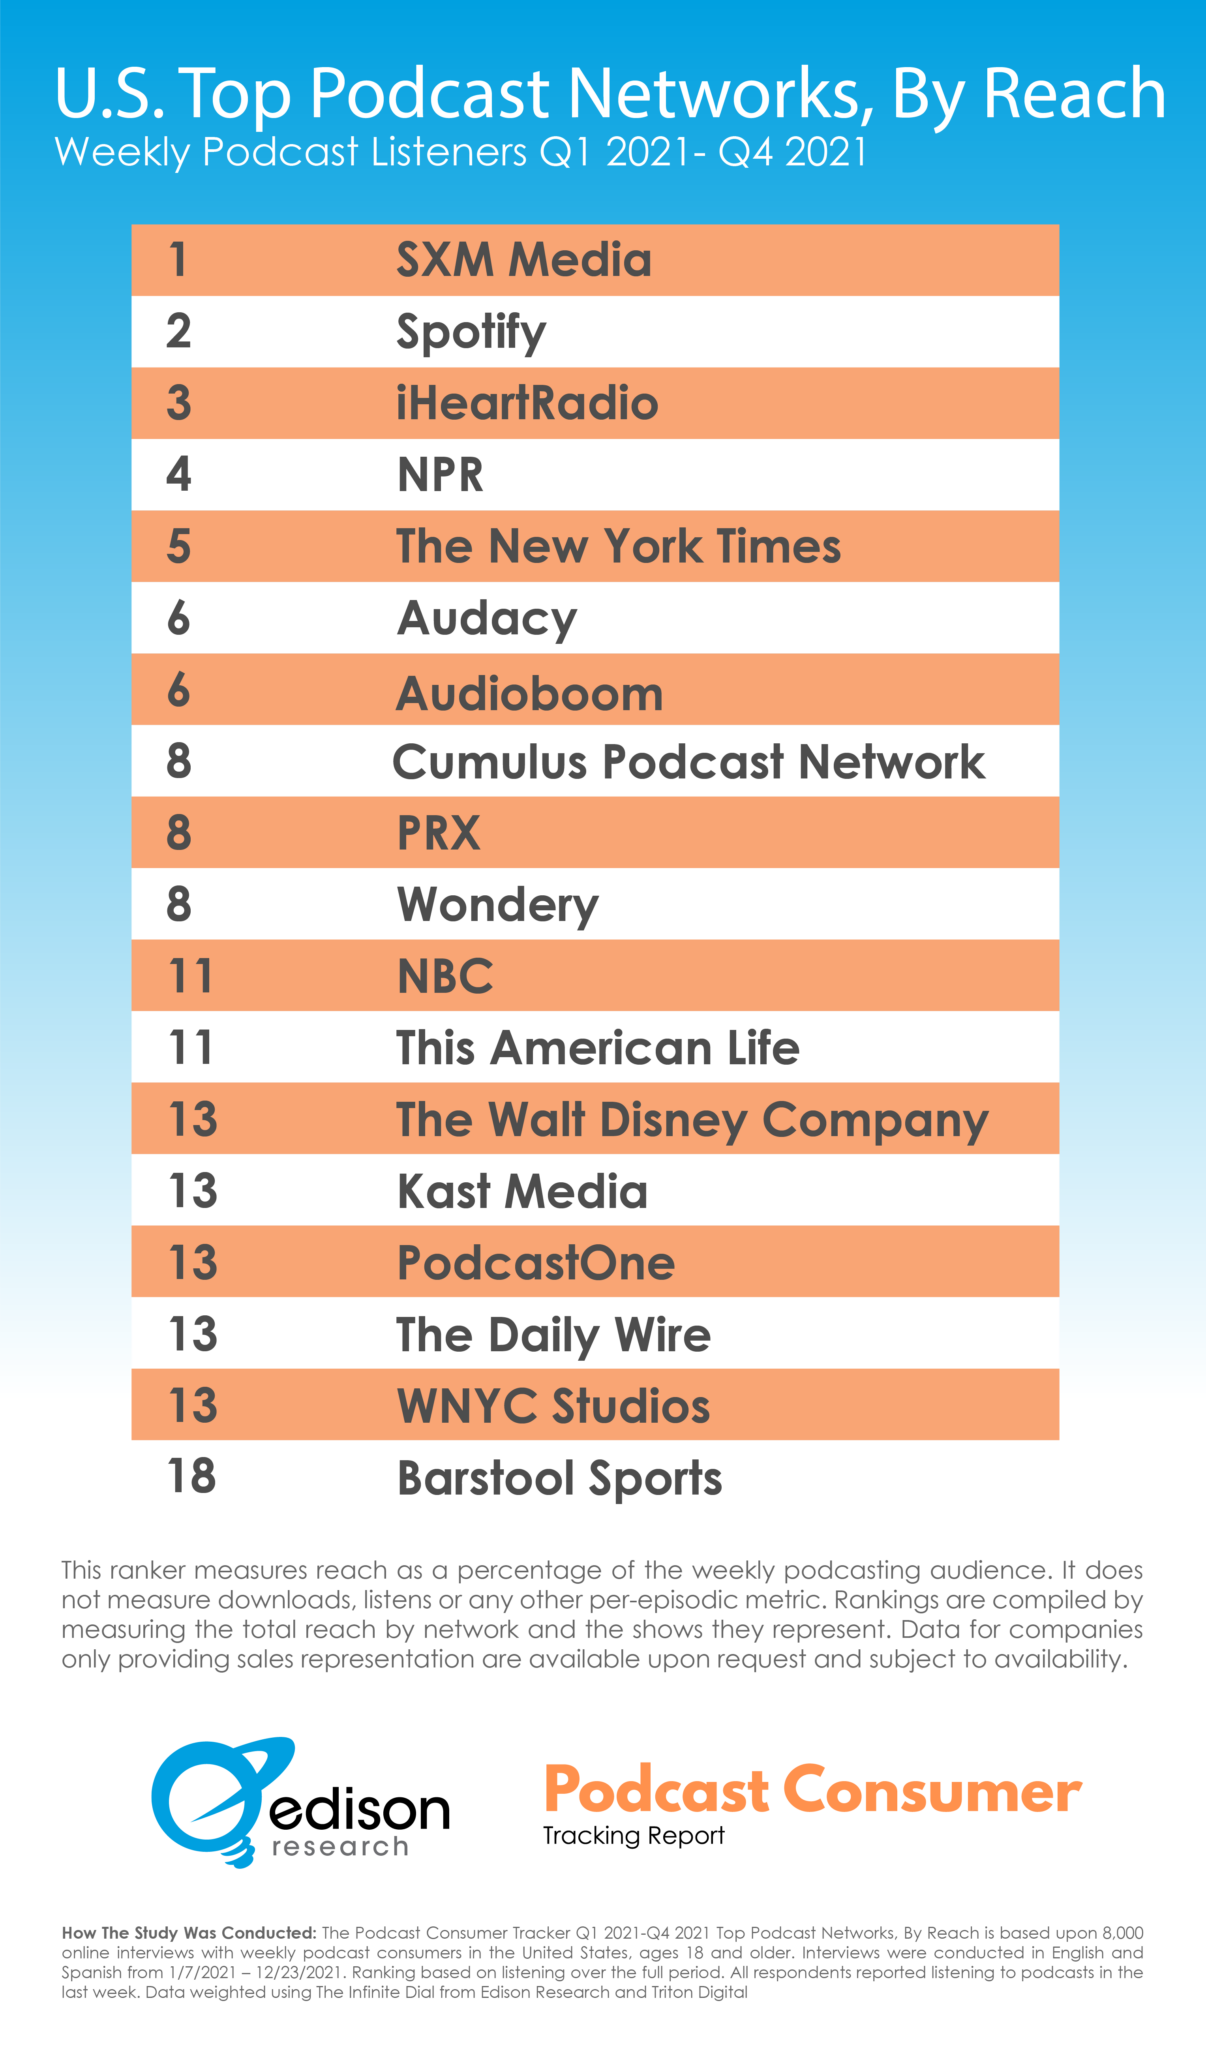 U.S. Top Podcast Networks by Reach Q4 2021 Edison Research